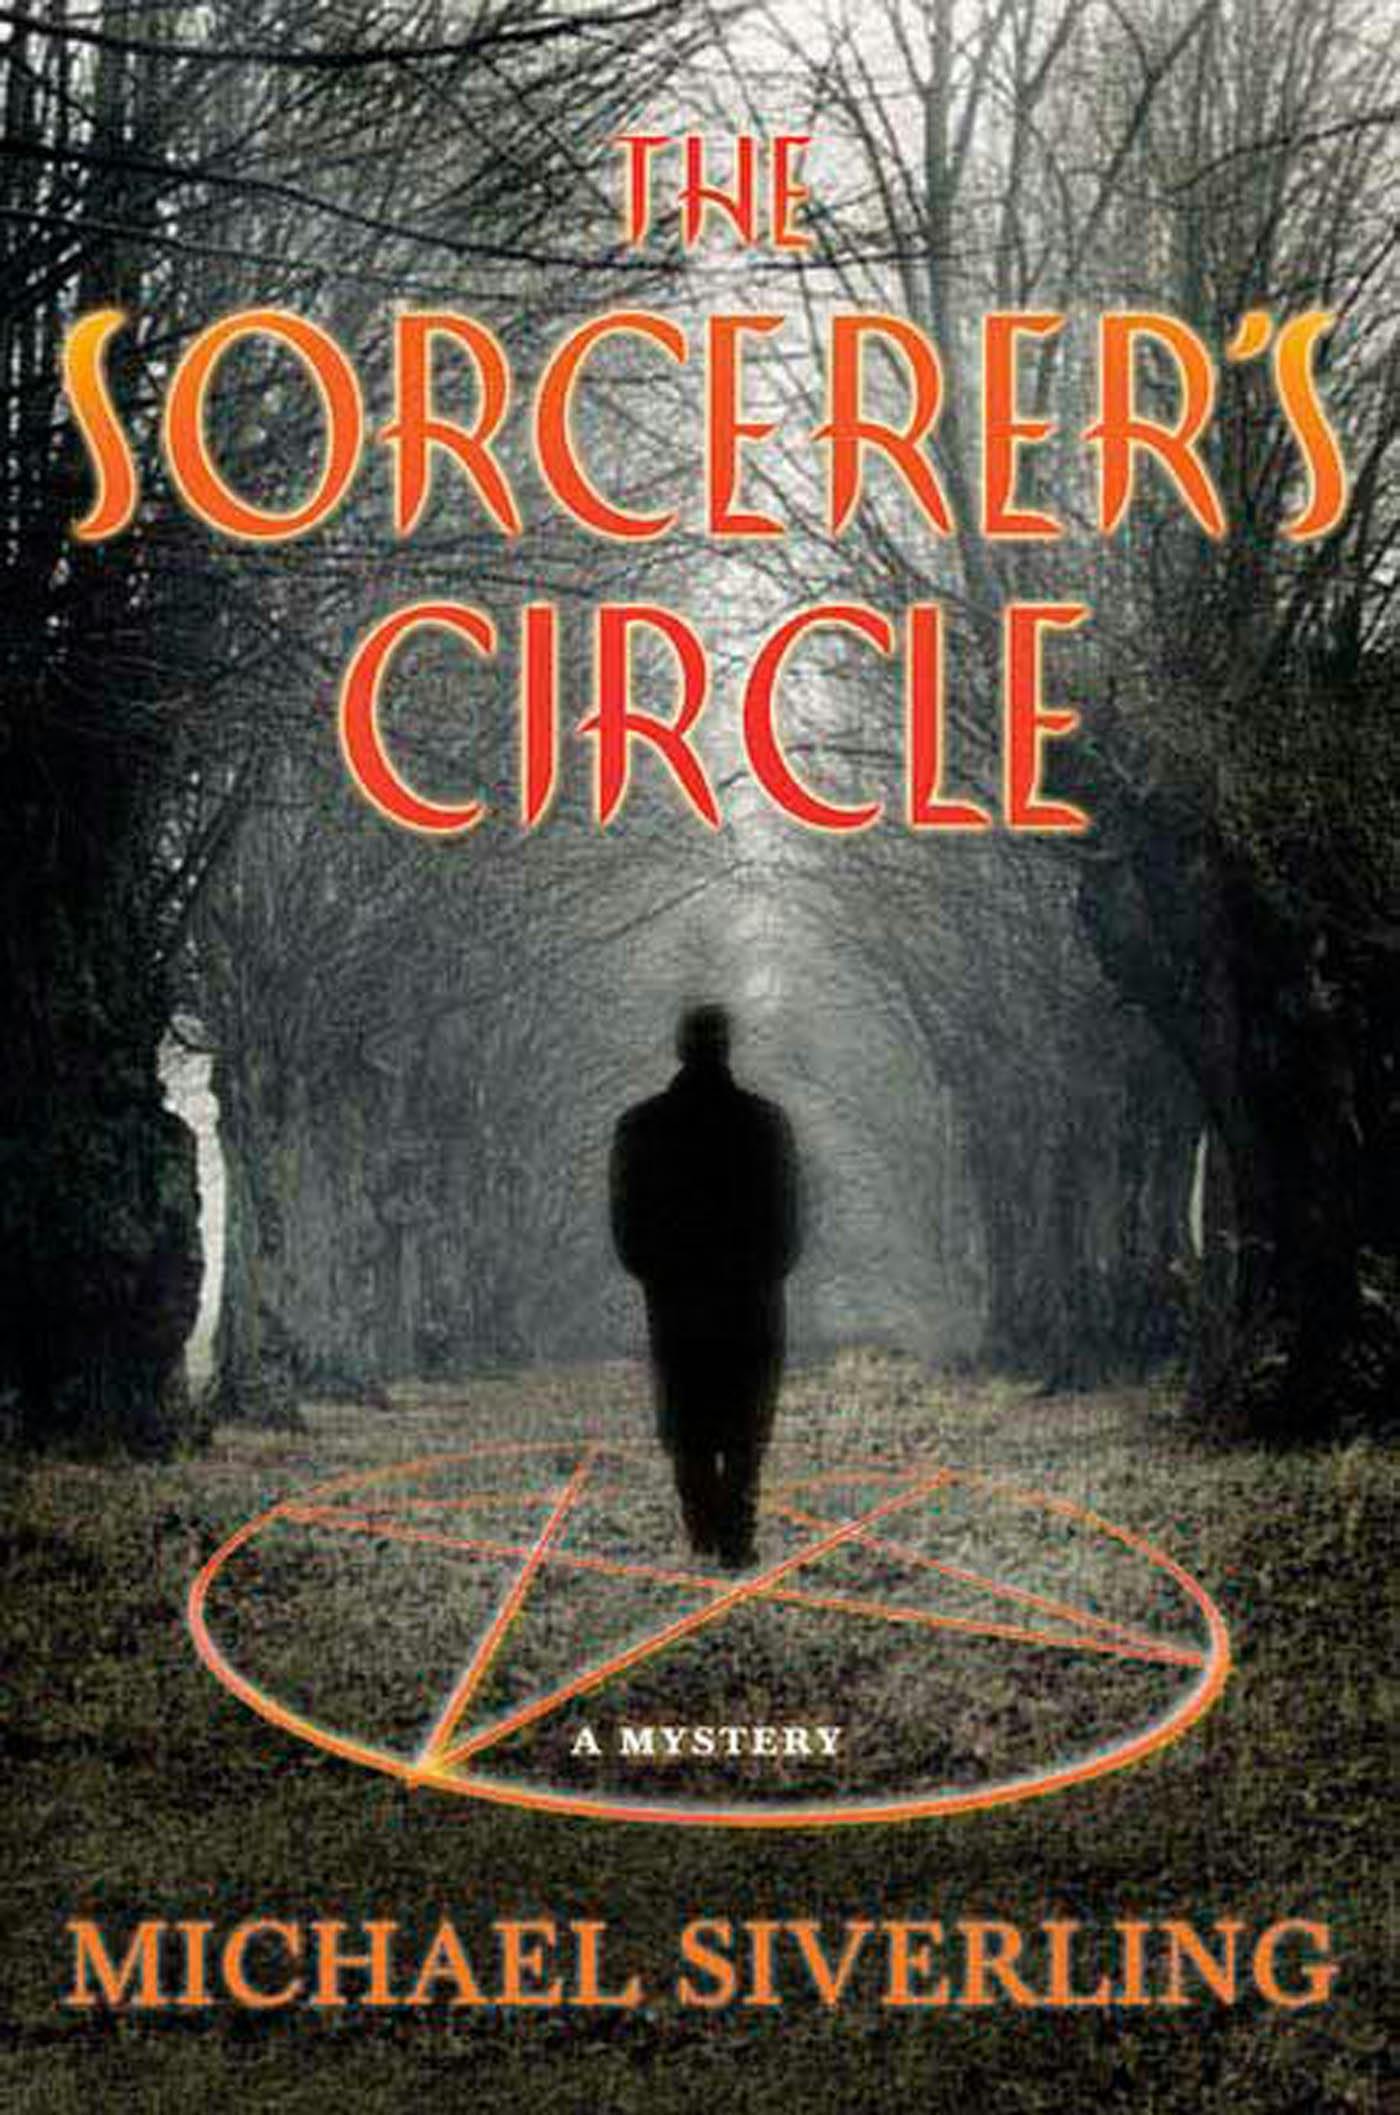 Image of The Sorcerer's Circle